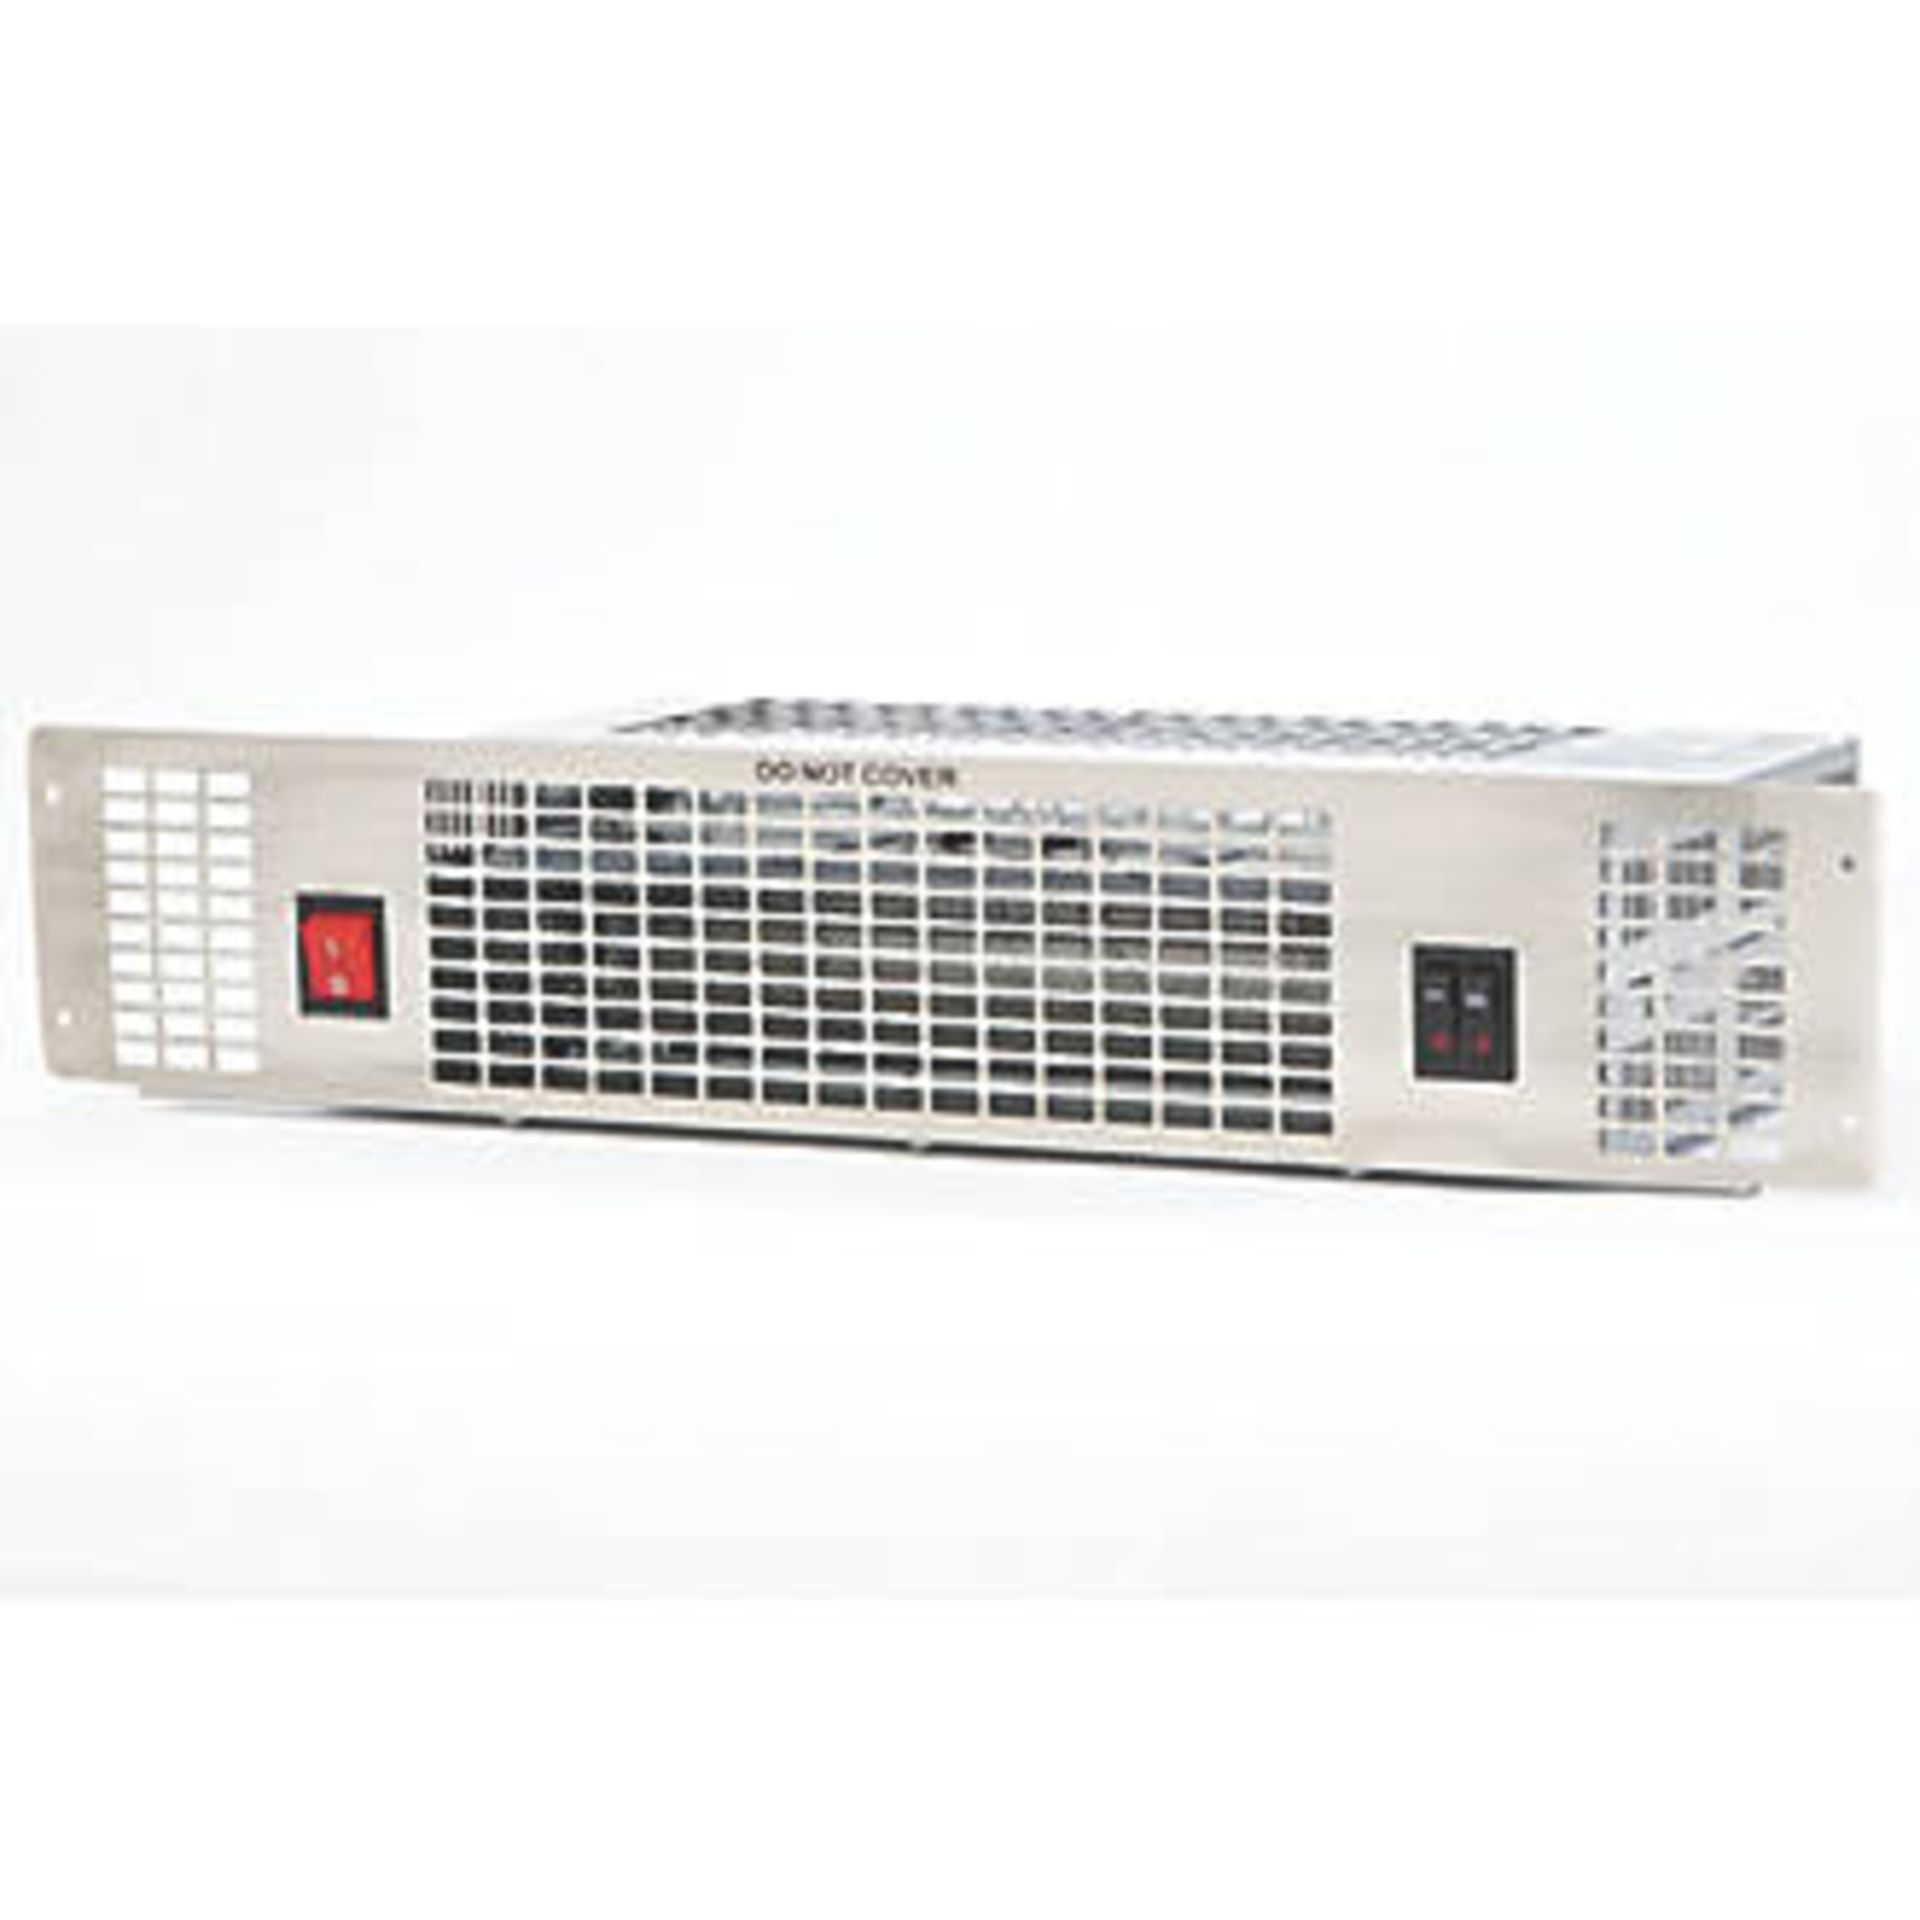 50x TCP UPH201SS PLINTH-MOUNTED FAN HEATER SILVER 2000W 500 X 100MM, new and boxed, Economic,